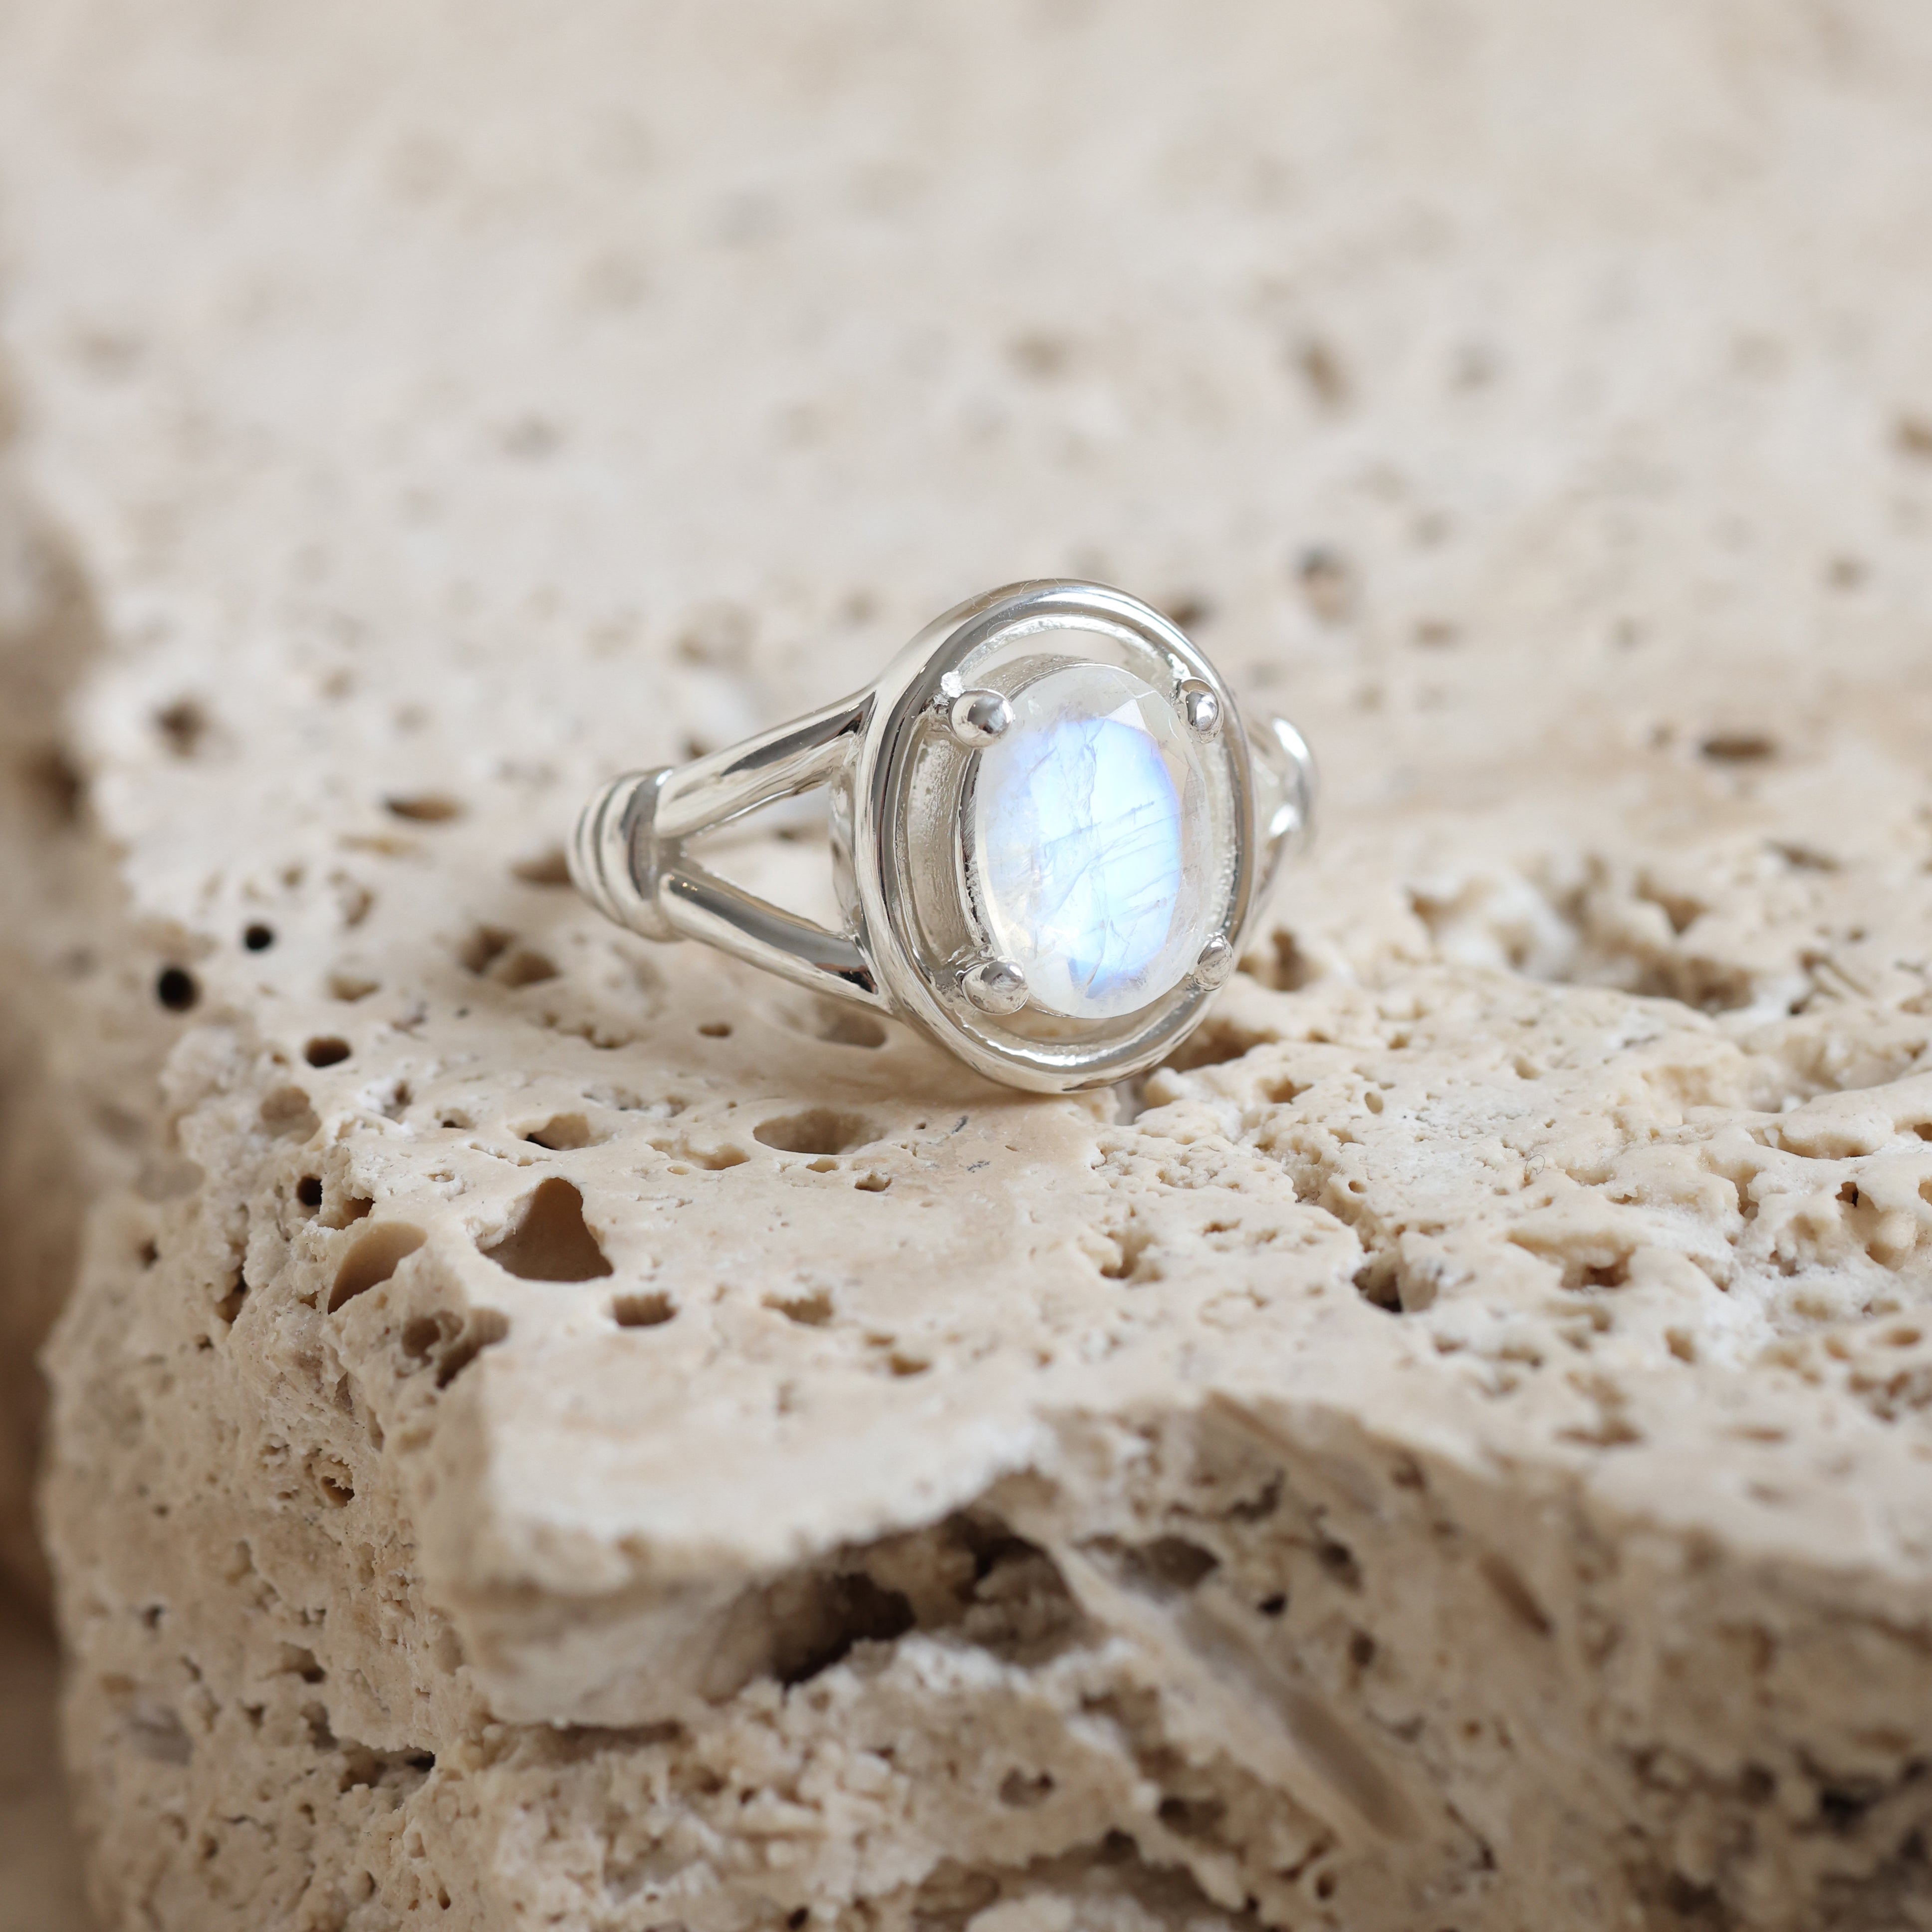 The Halo Silver Ring